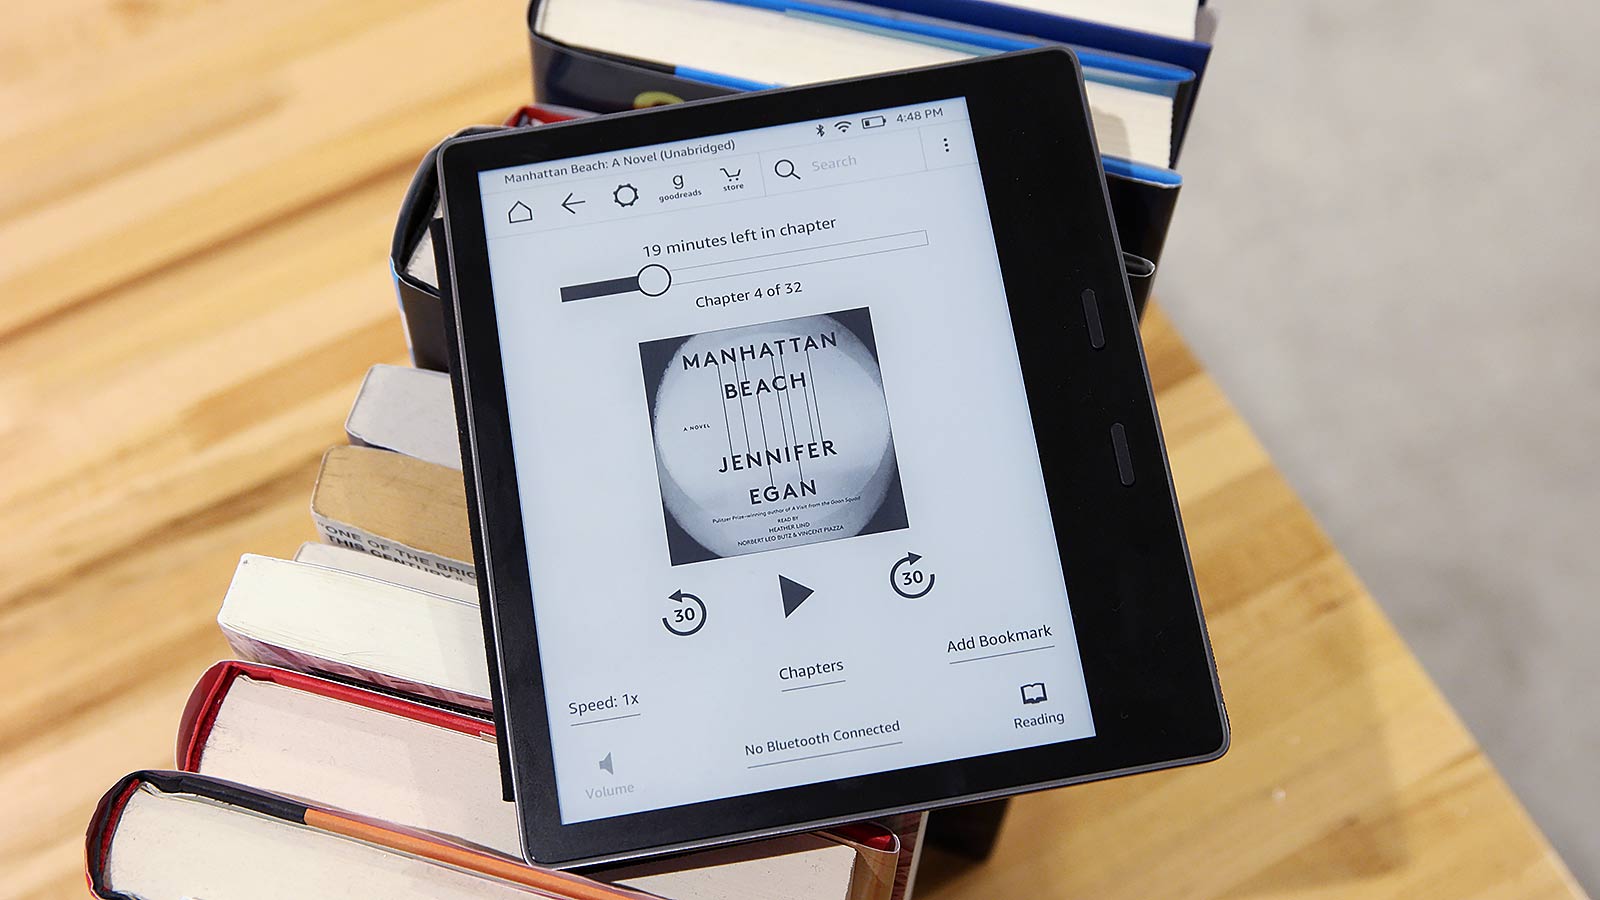 Amazon’s New Kindle Oasis: The Gizmodo Review